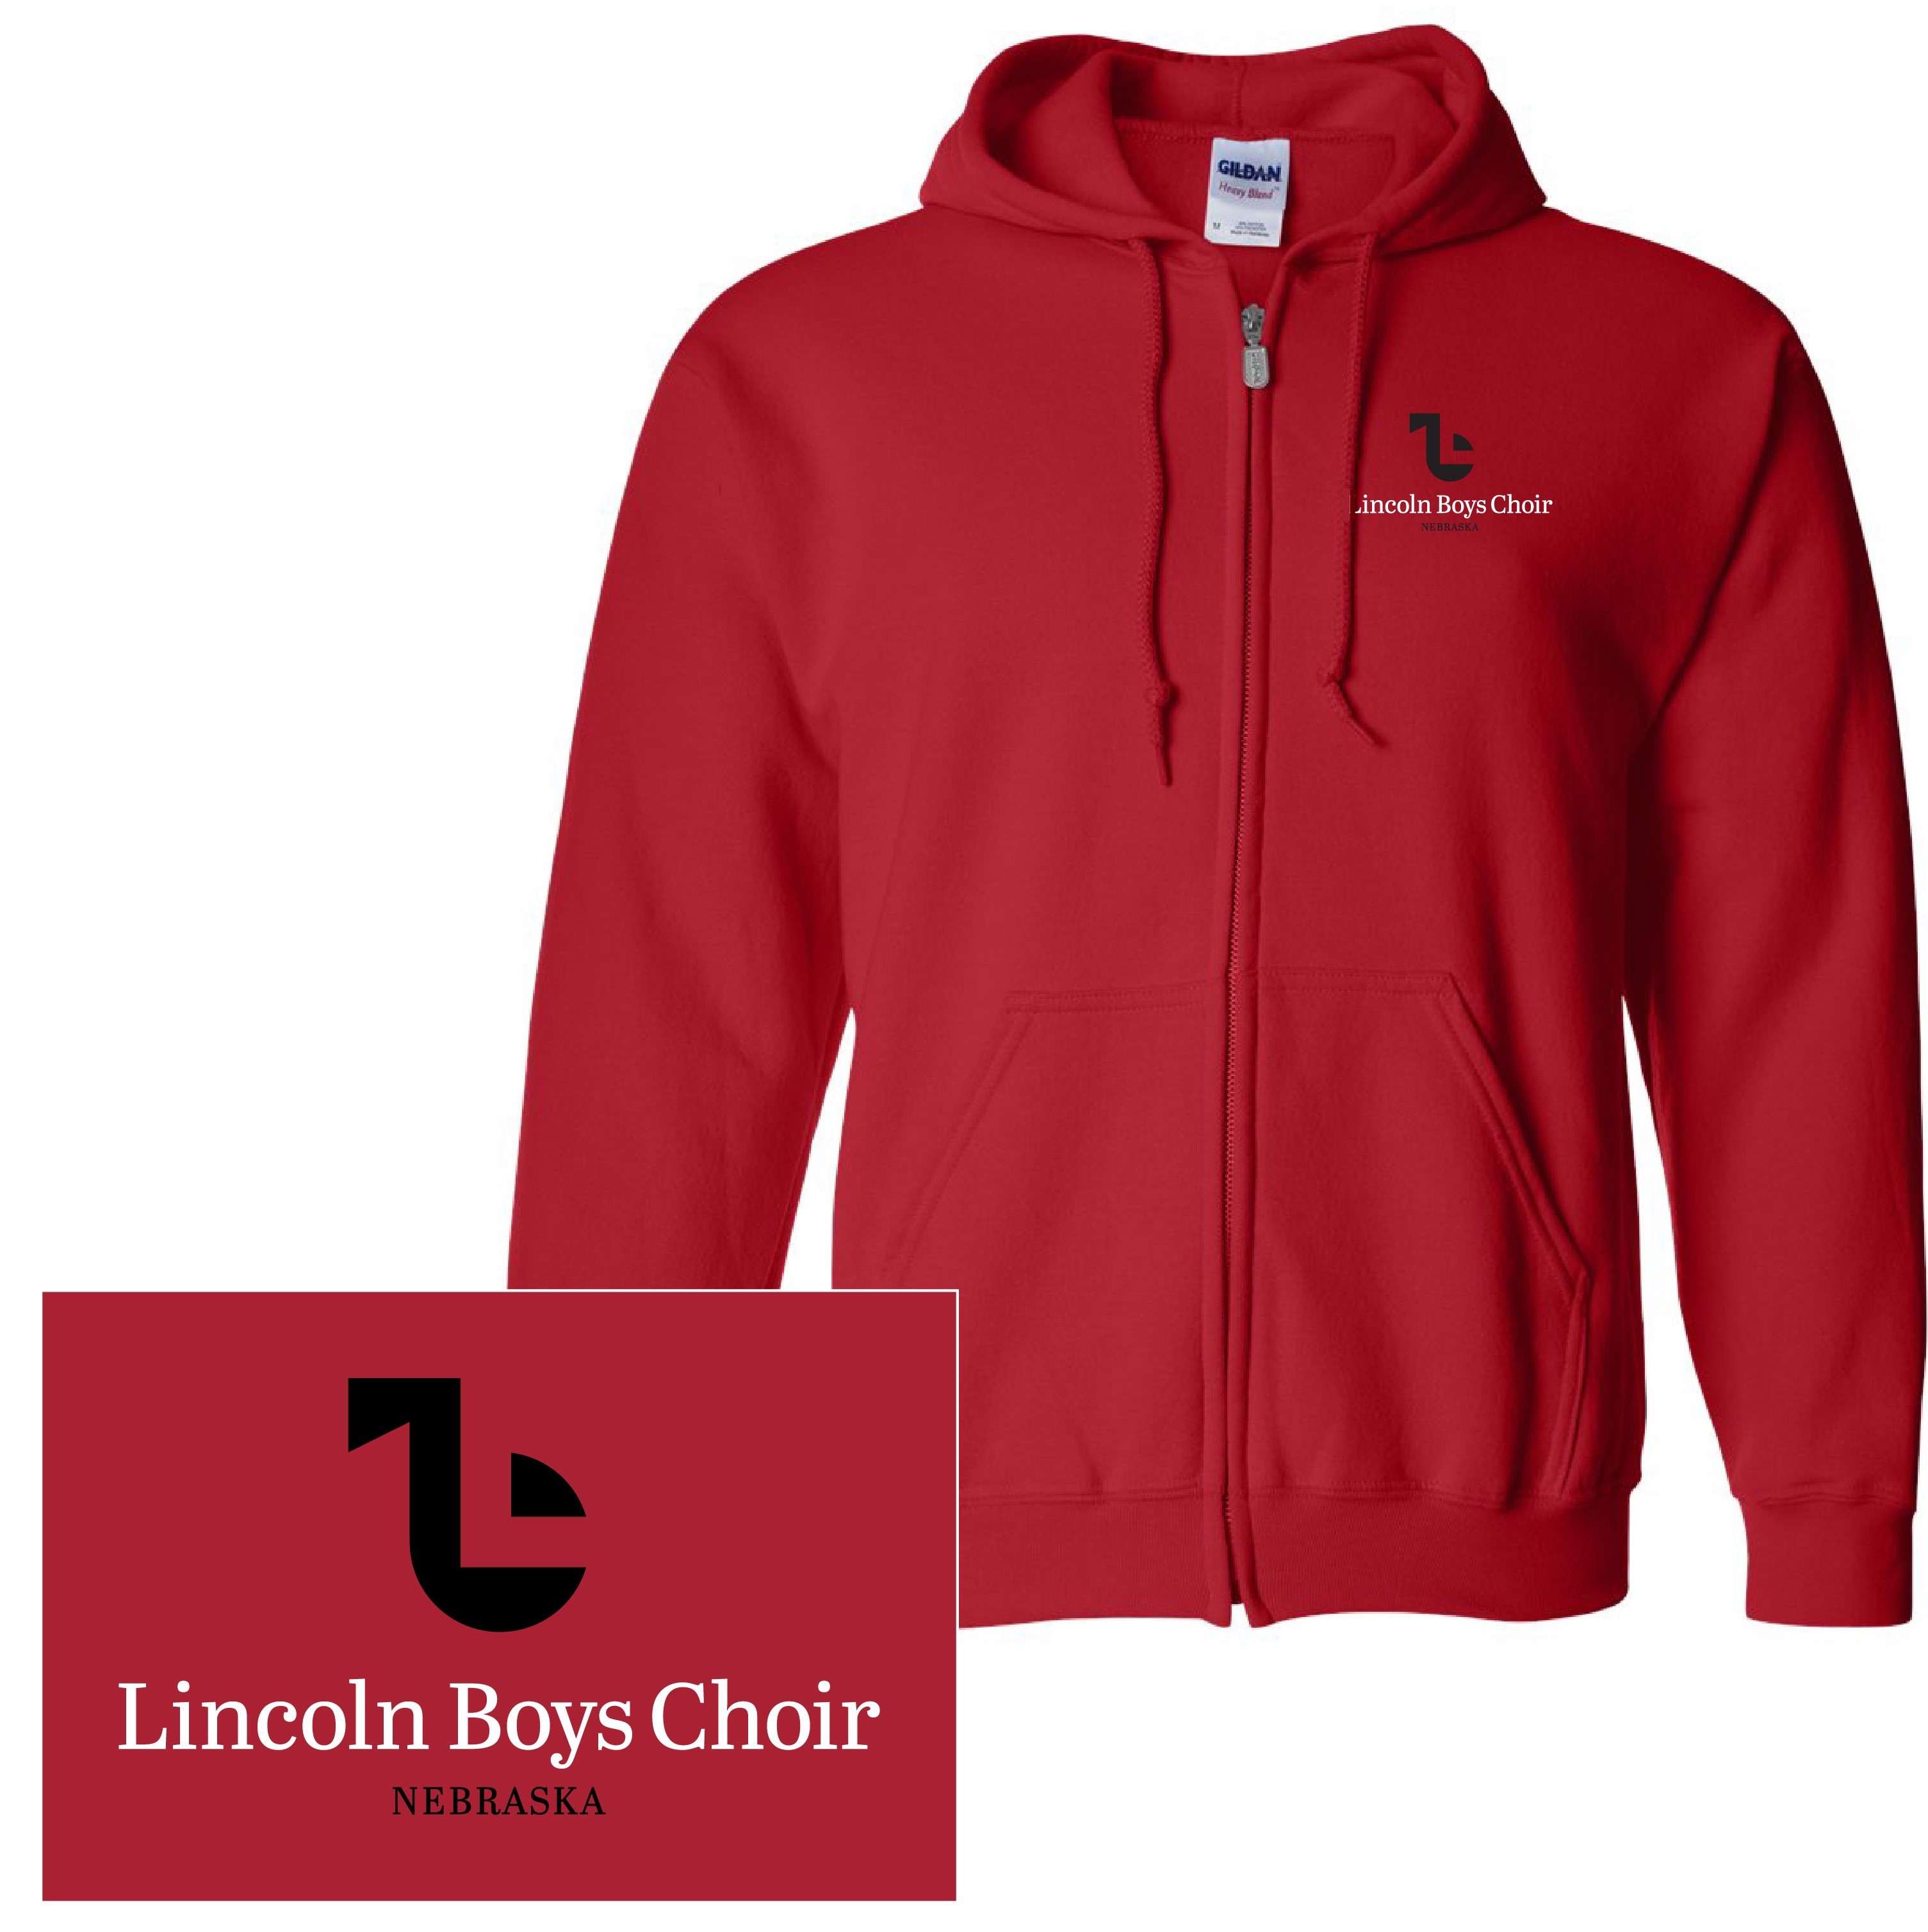 YOUTH Zip up Hoodie (Optional for All Choirs)